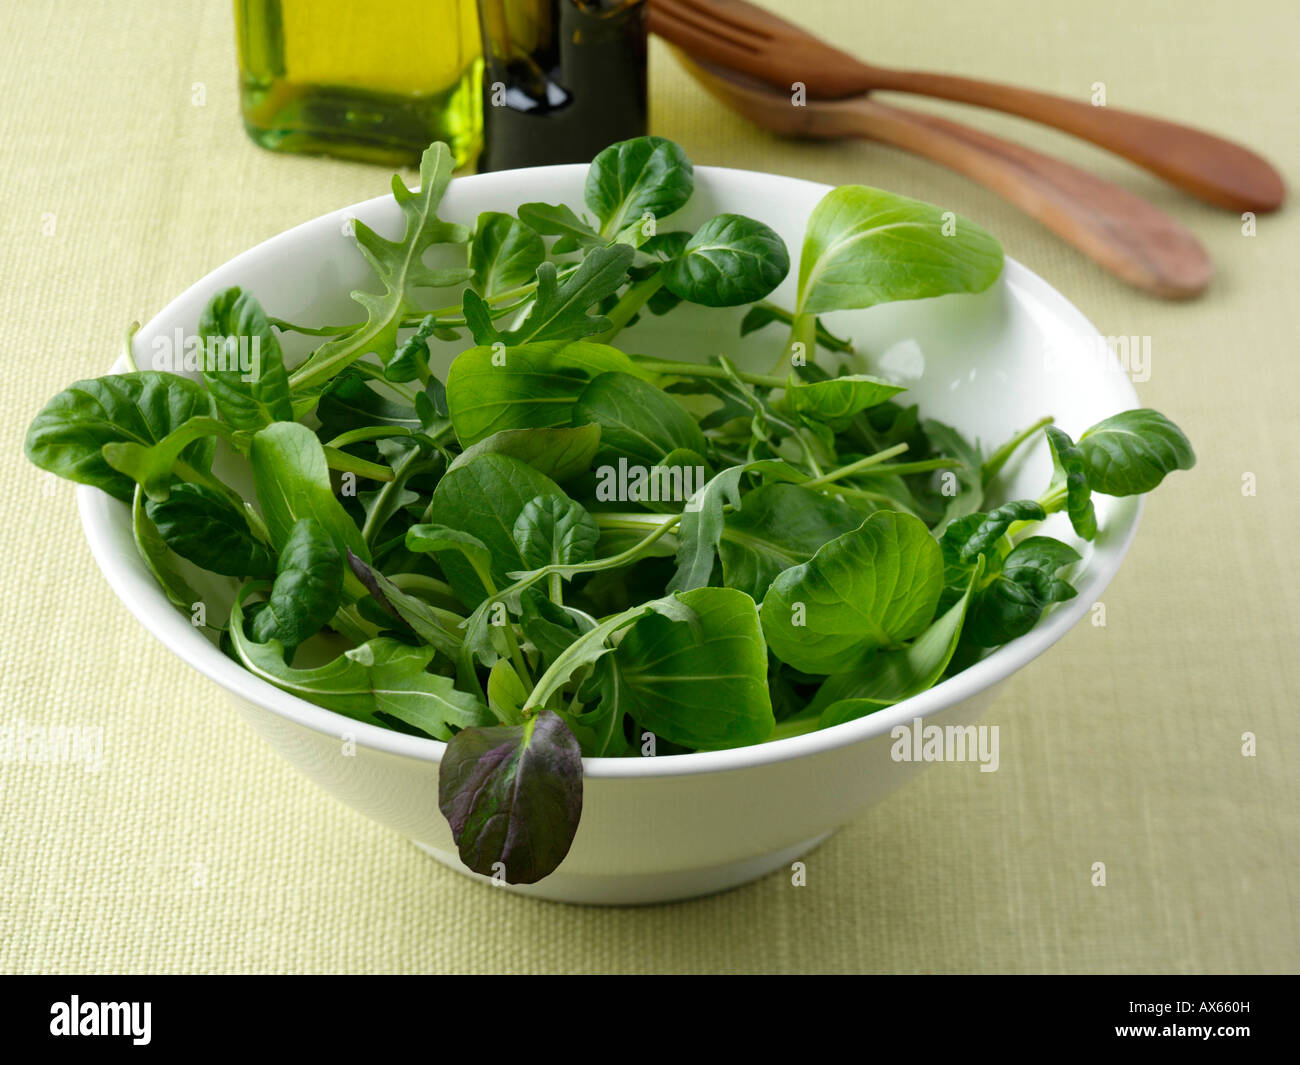 Green salad leaves rocket red chard red frills baby pak choi tatsoi spinach coriander mustard leaves editorial food Stock Photo